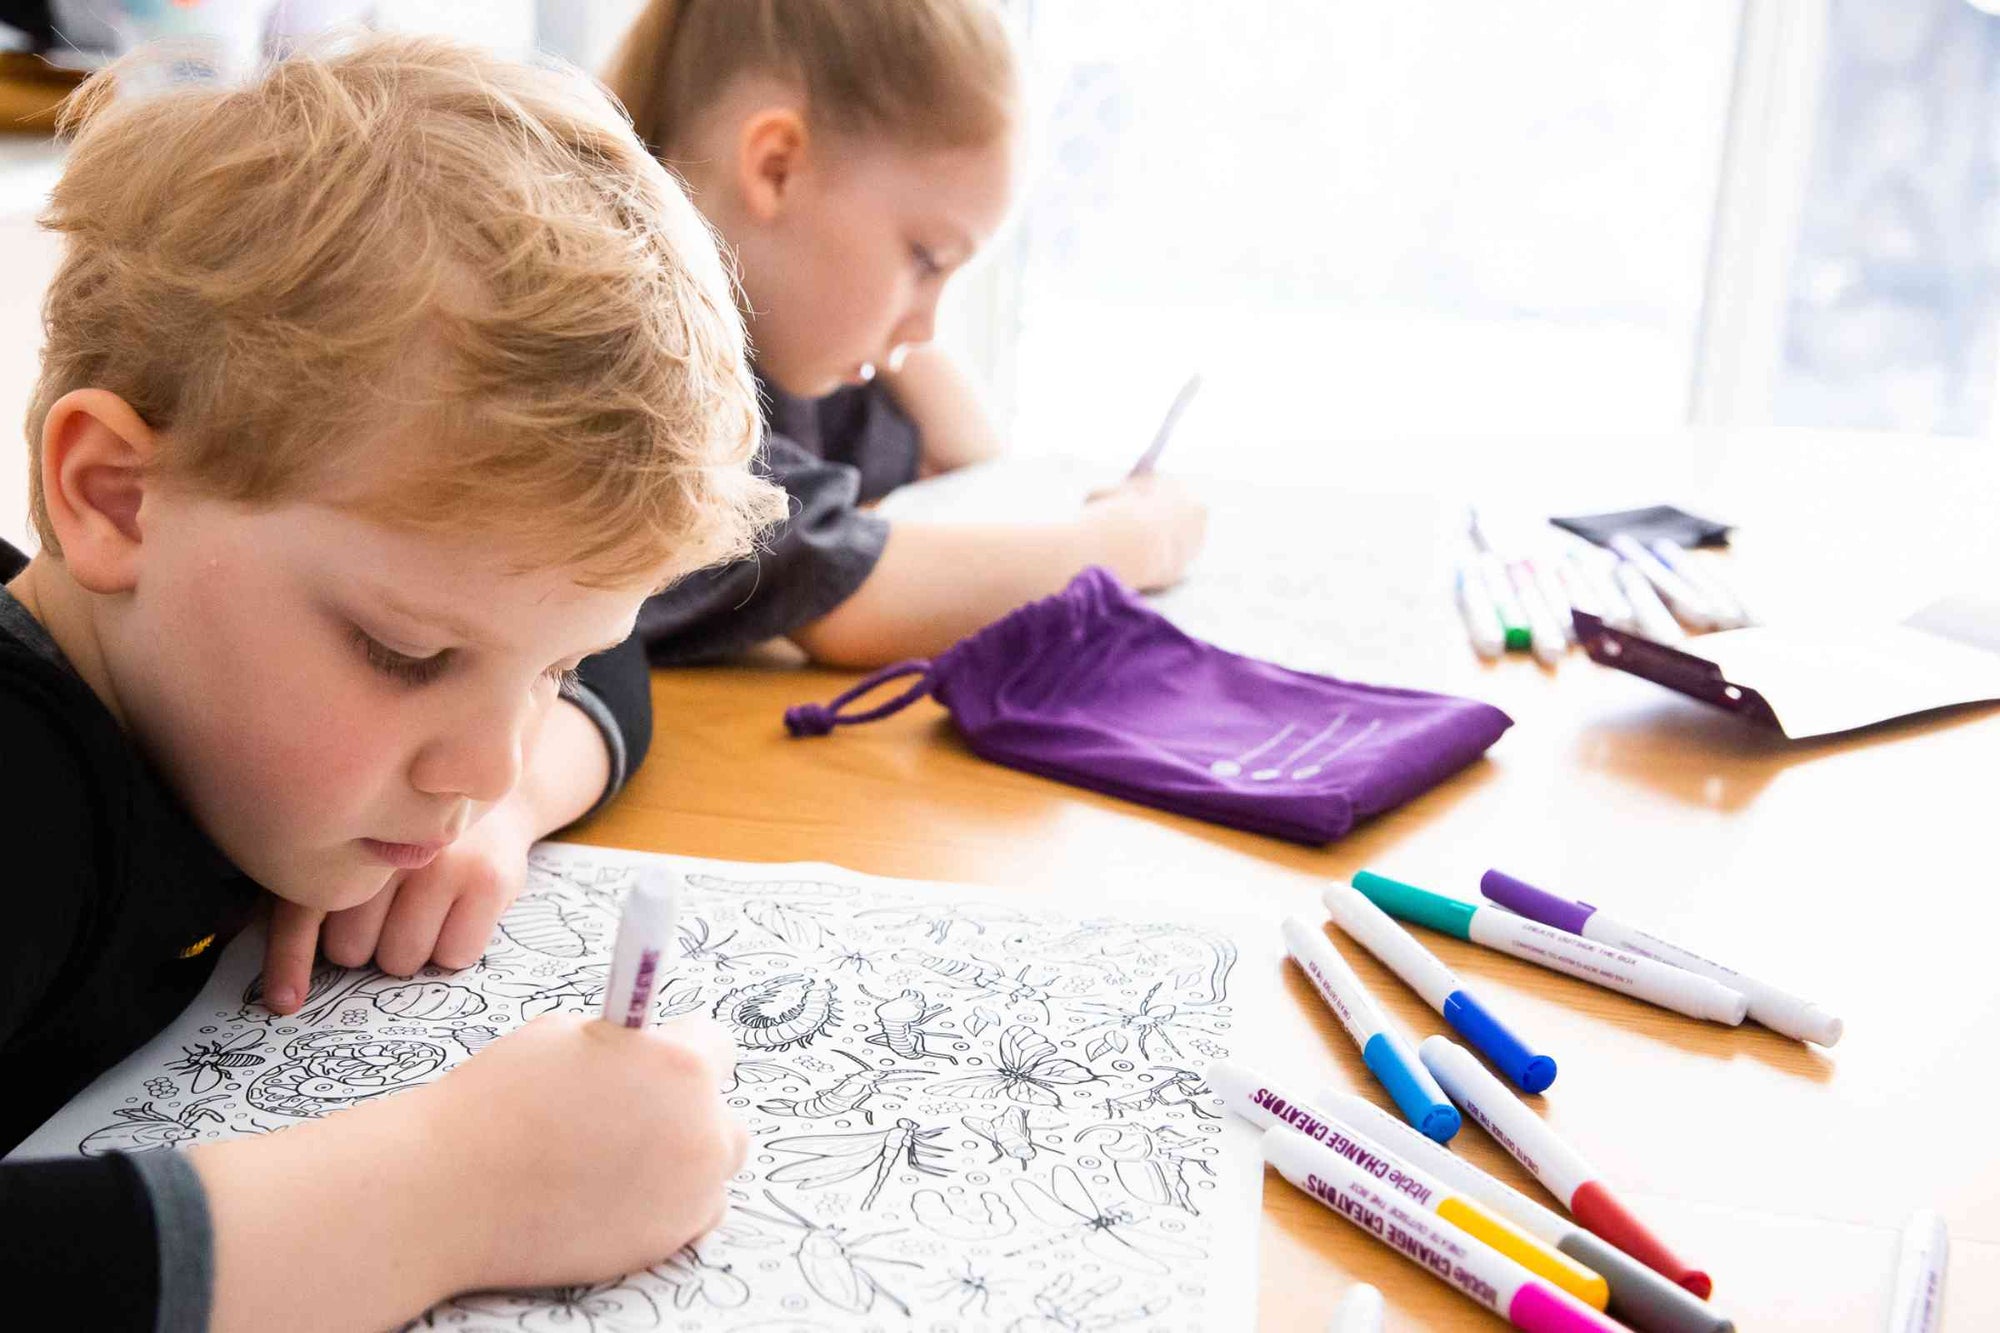 A well-lit mage of a boy and a girl sitting at a table drawing on a silicone colouring mat.  Colourful pens are sprawled across the table.